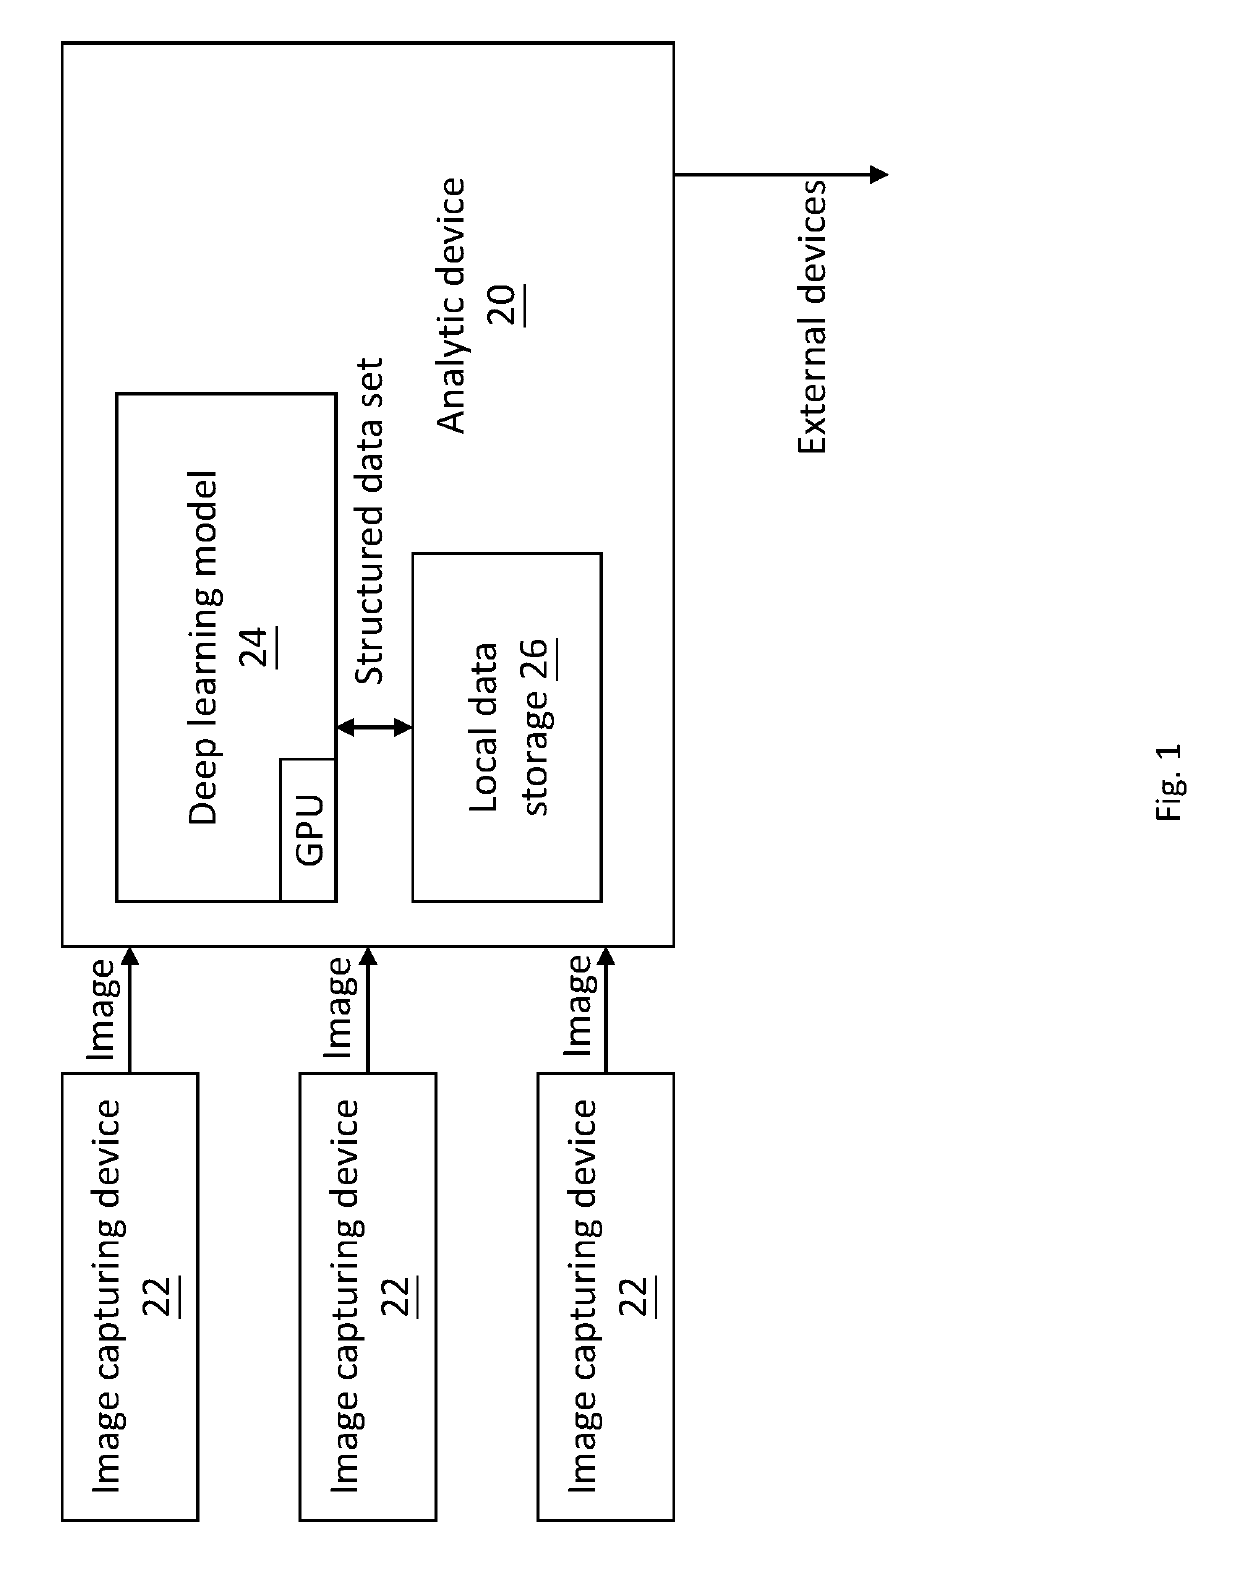 Visual and geolocation analytic system and method